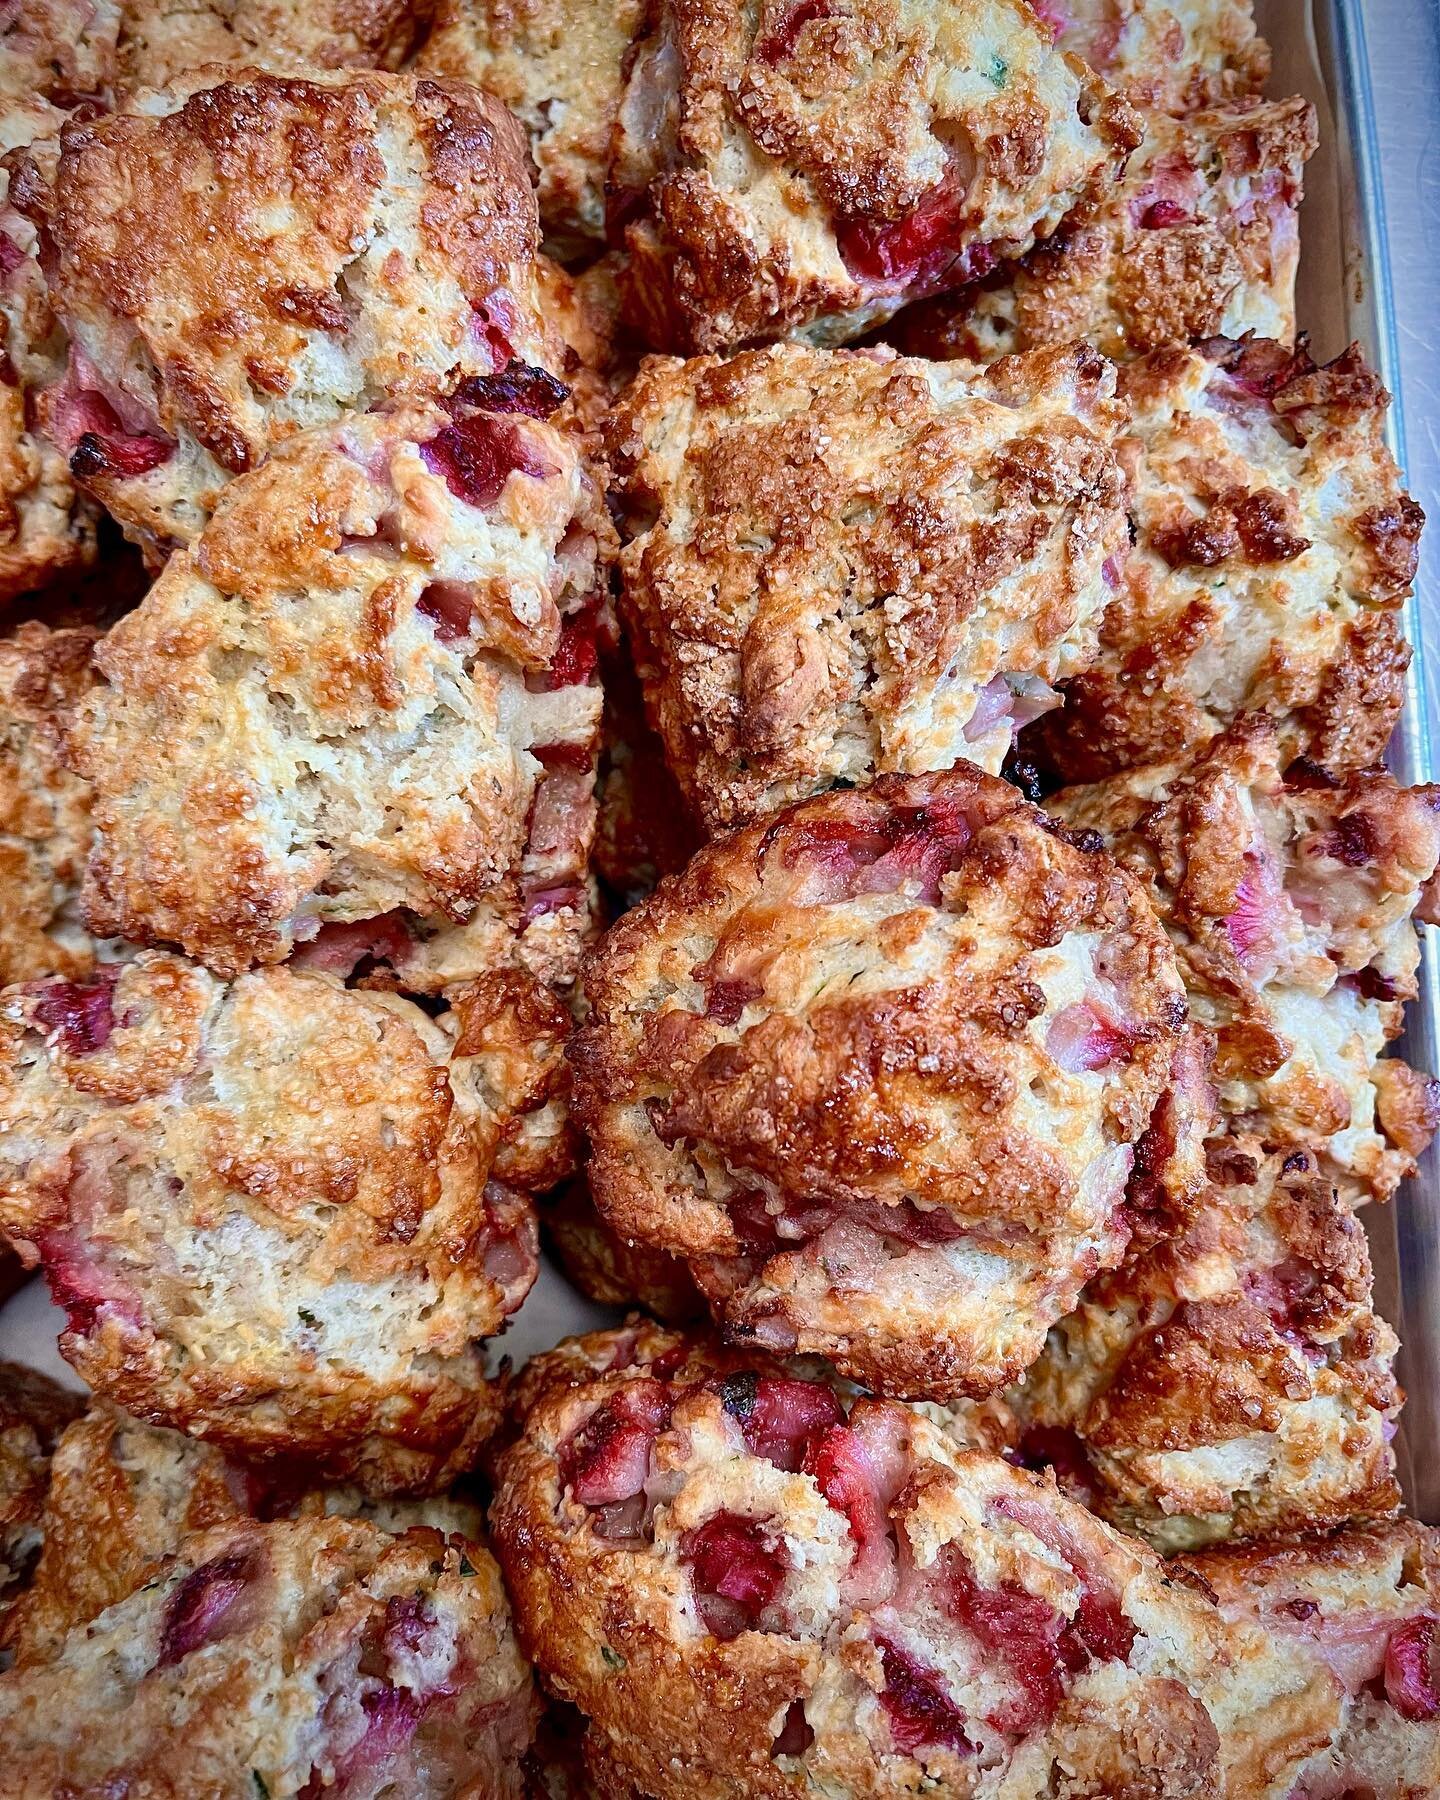 nearing the end of strawb scones

PASTRIES TOMORROW
9 - noon

stuff that freezer bc we are going out if town and are NOT going to have bagels, scones, or buns the rest of the month!!

🍓